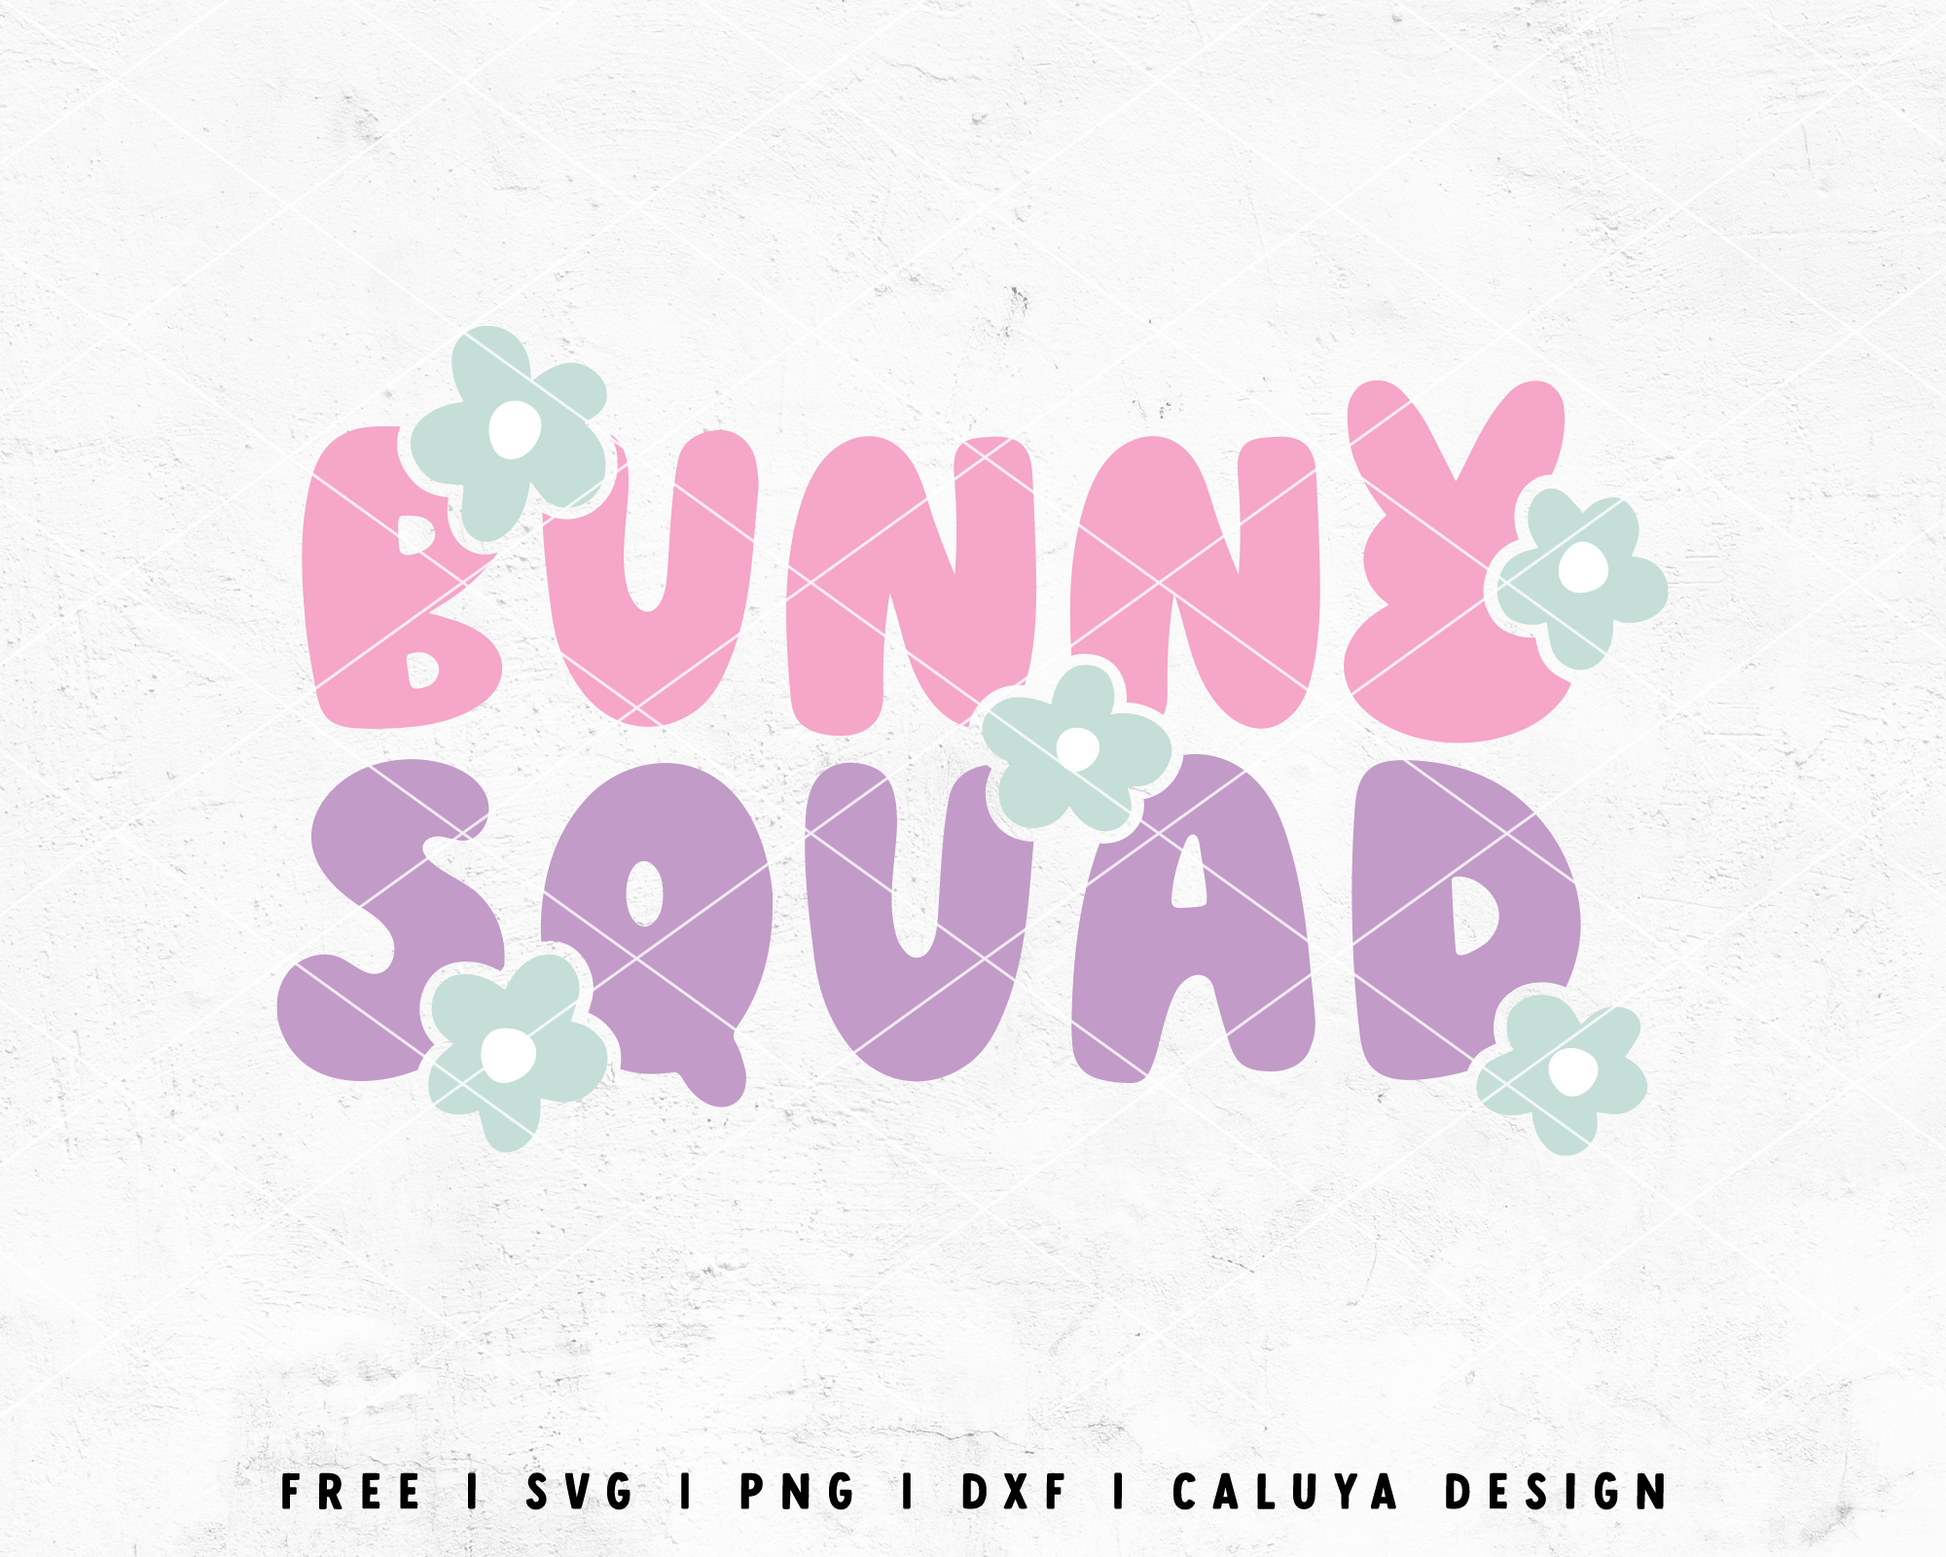 FREE Easter SVG | Bunny Squad SVG Cut File for Cricut, Cameo Silhouette | Free SVG Cut File